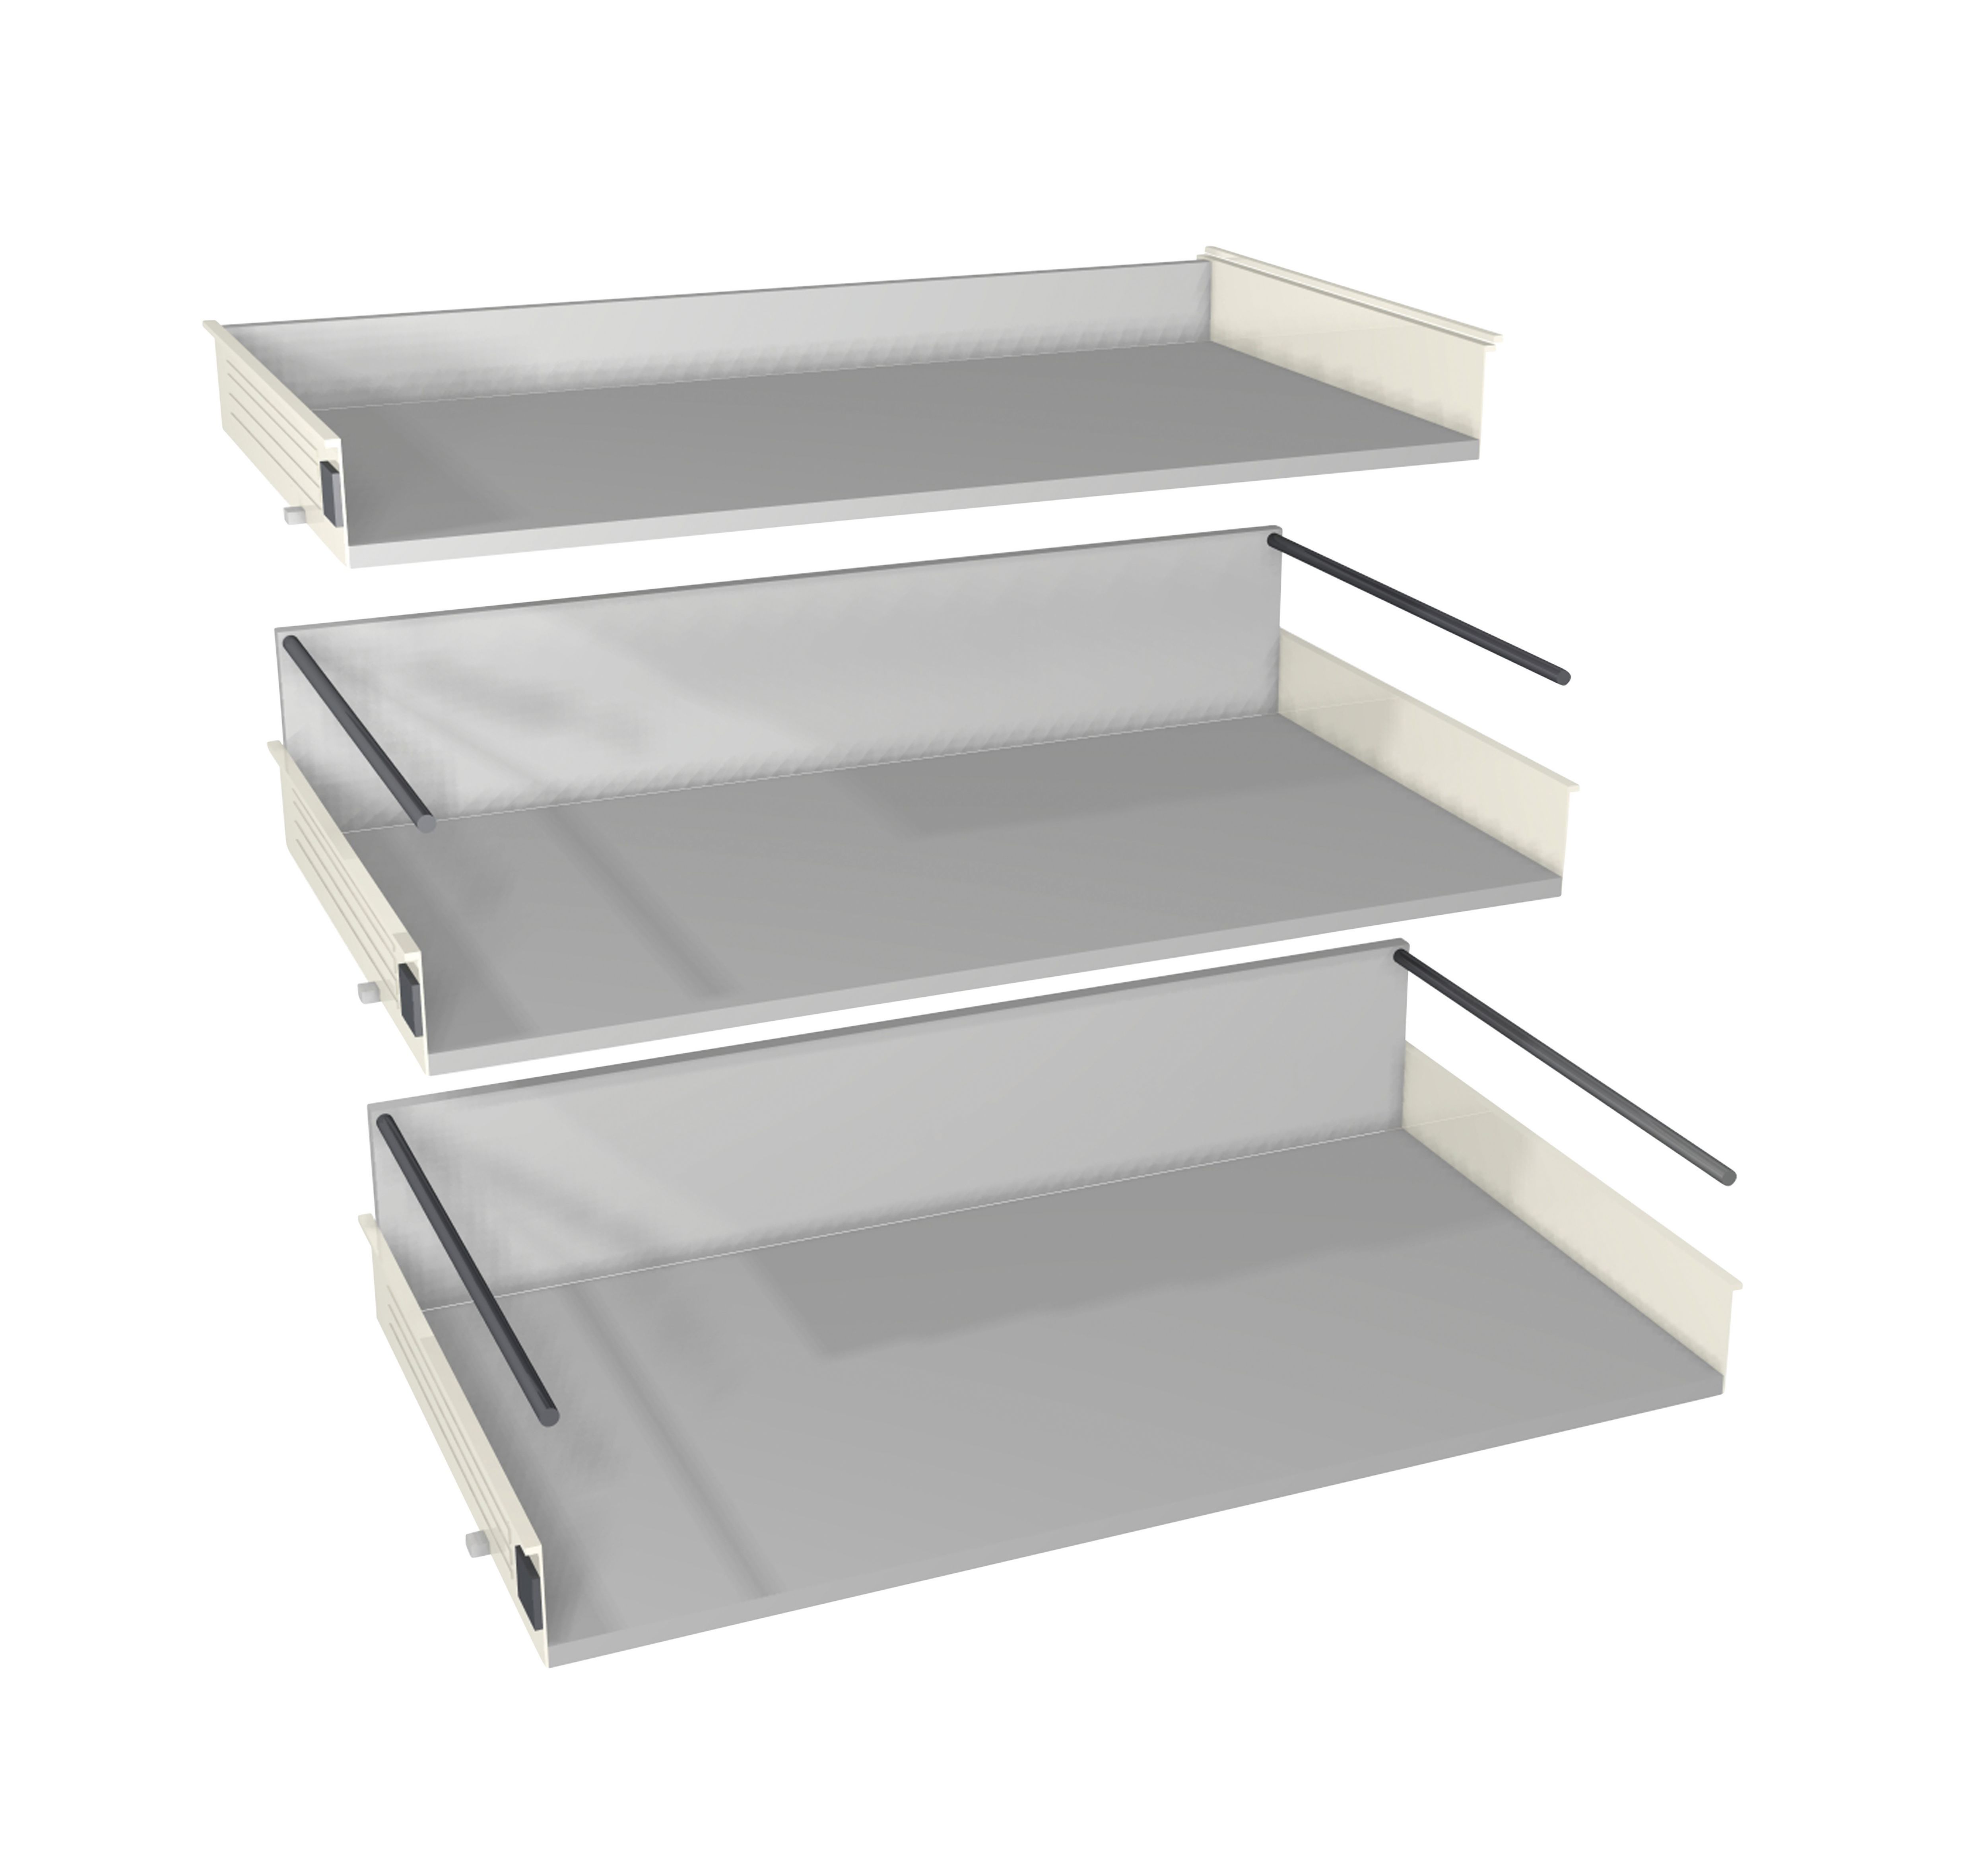 Image of Wickes 3 Pan Drawer Set - 900mm Part 2 of 2